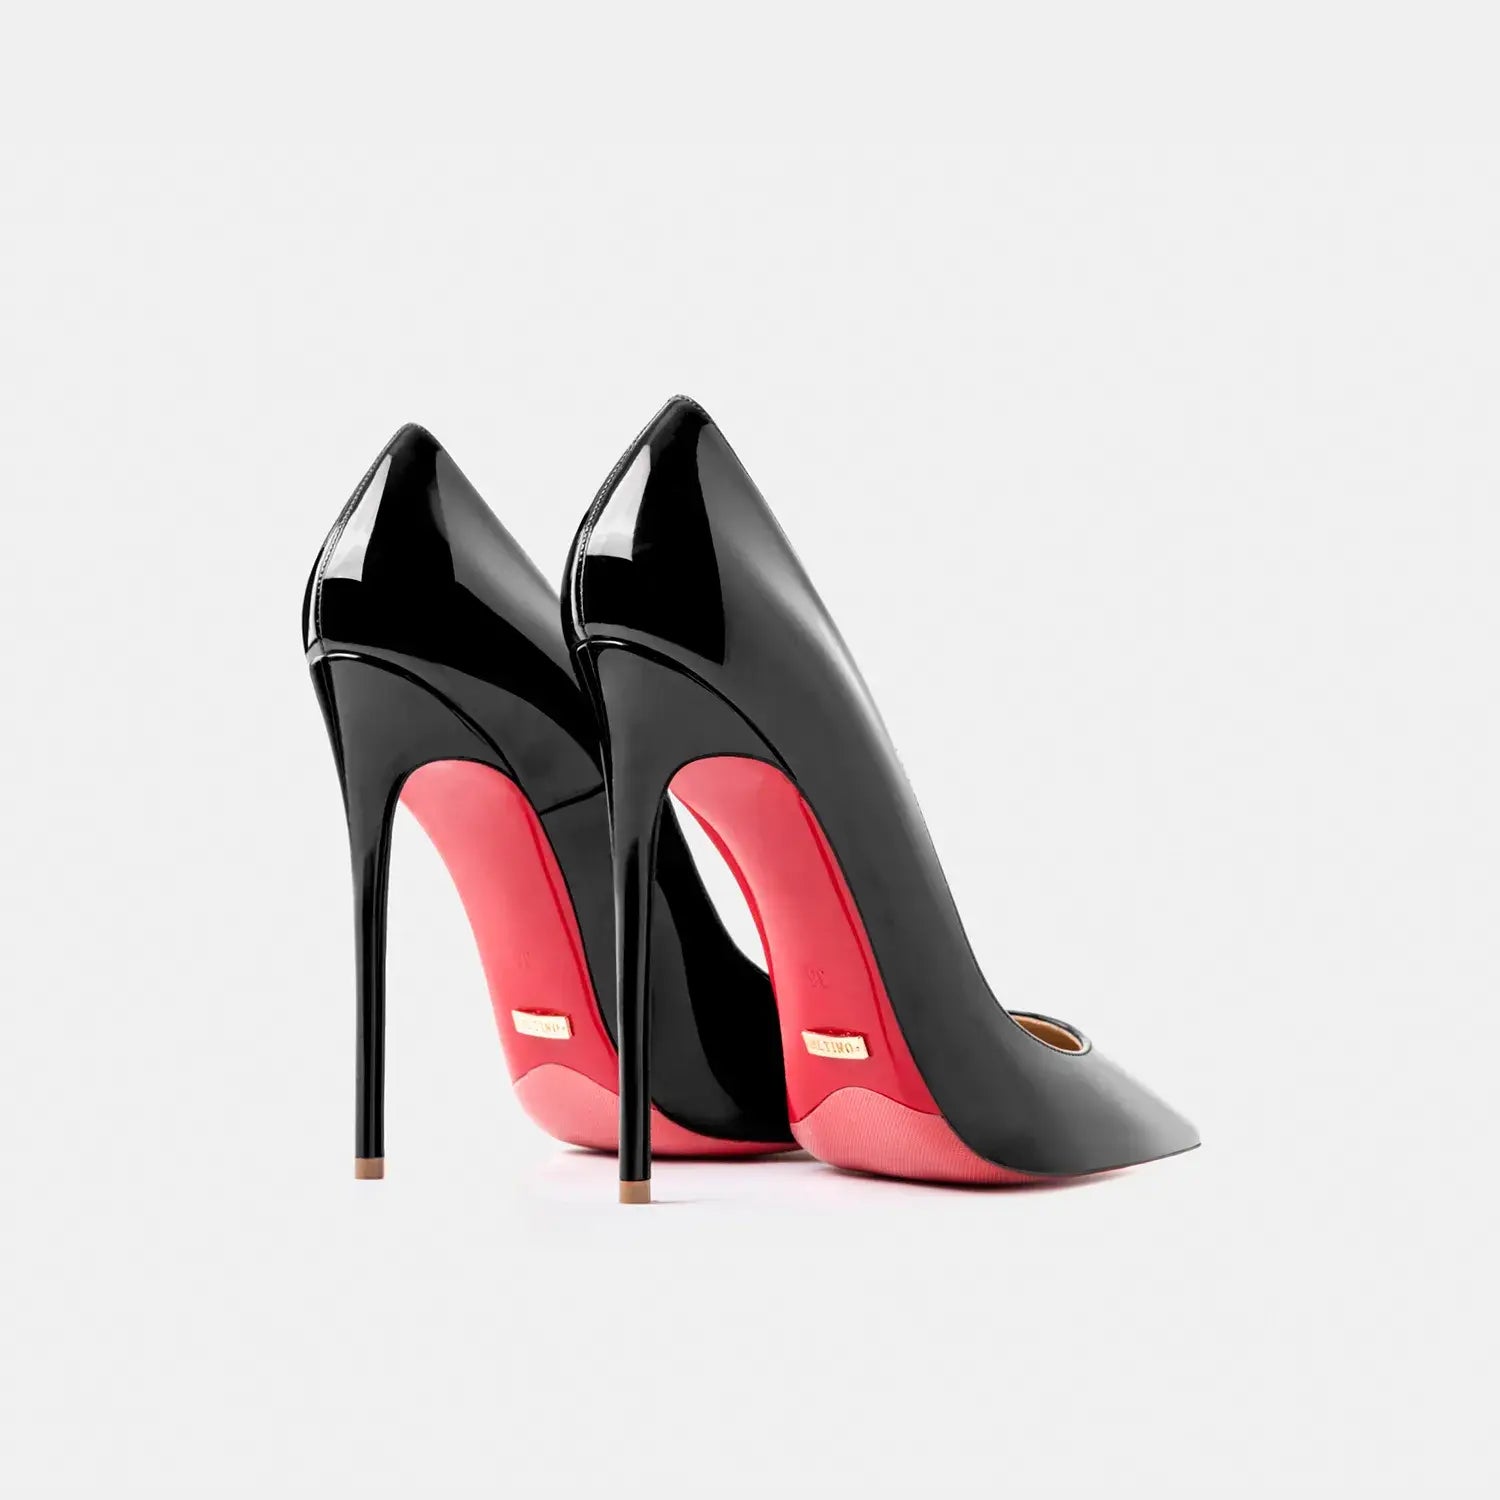 Real leather classic pumps red bottom pointed toe high heels